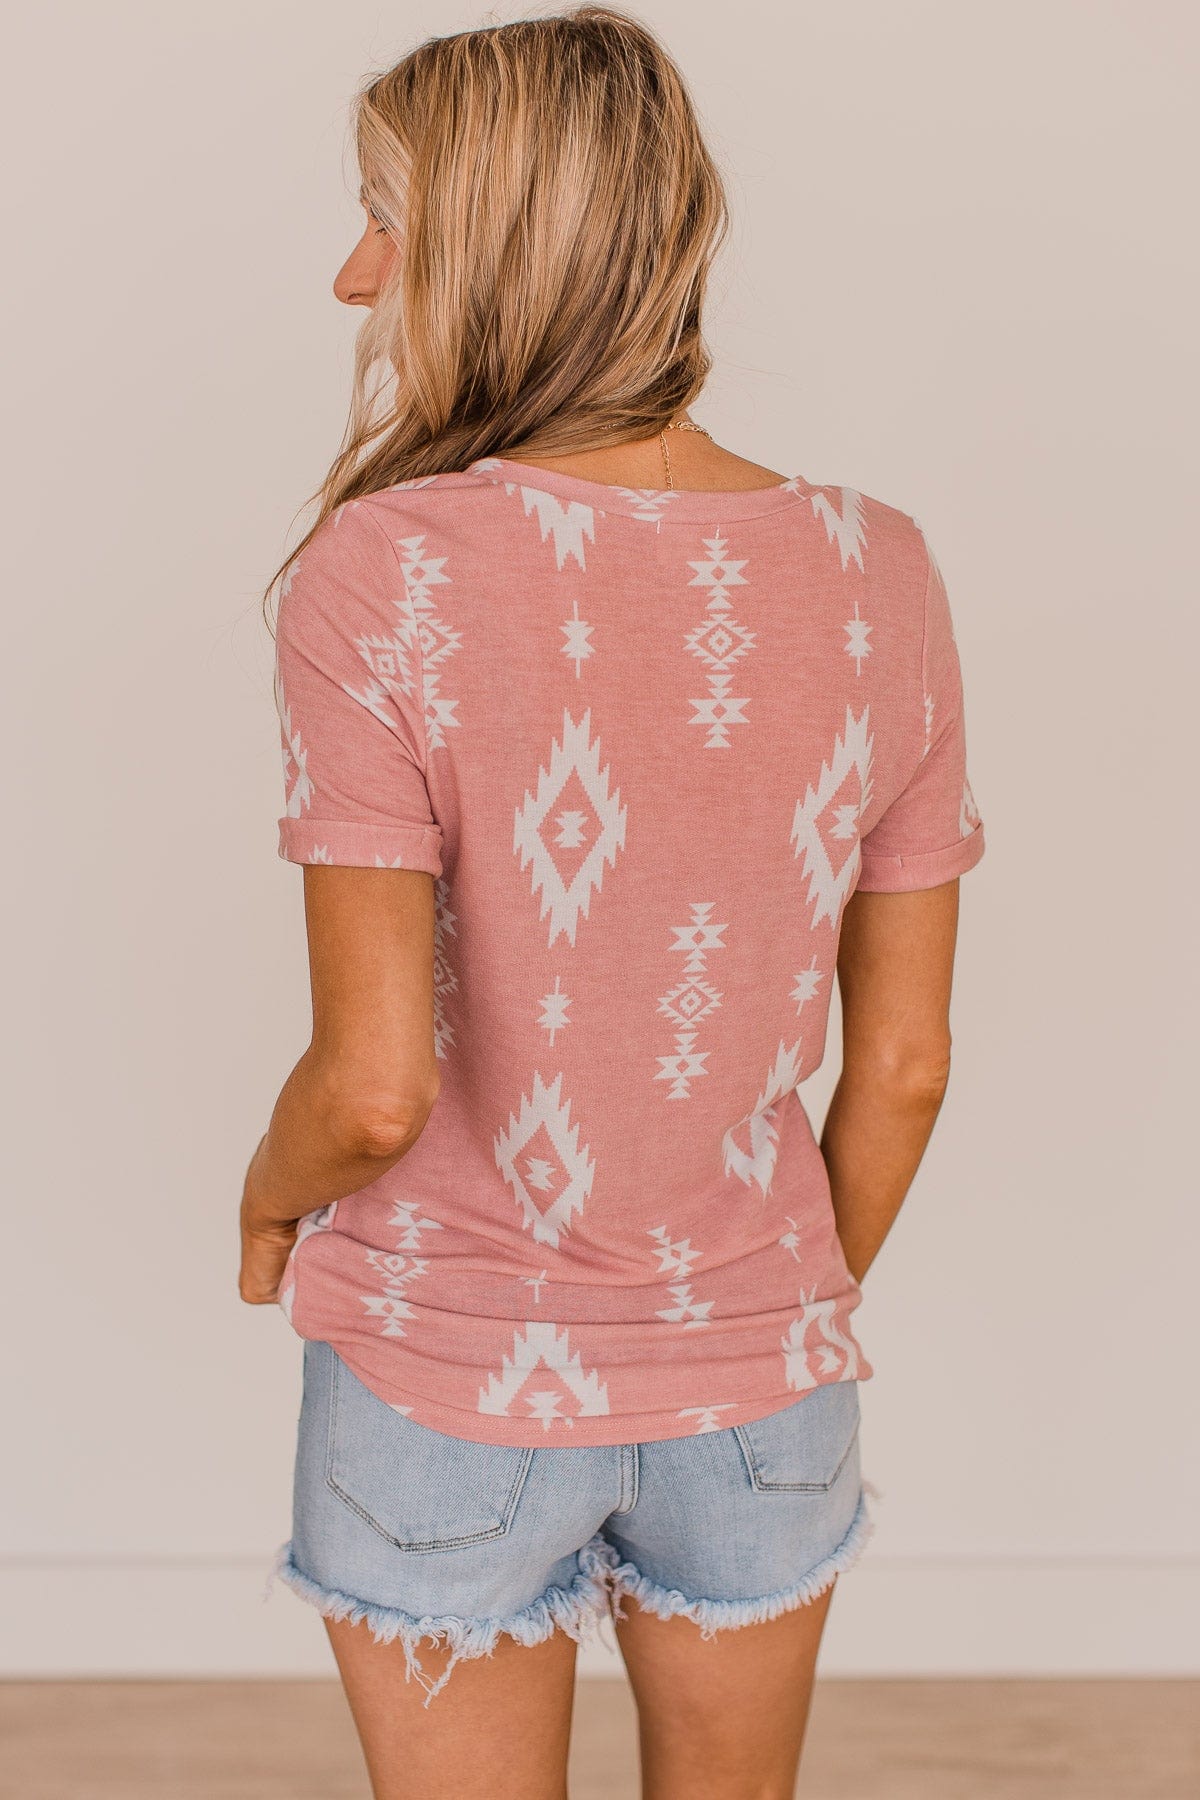 Spread Your Wings Aztec Print Top- Dusty Pink